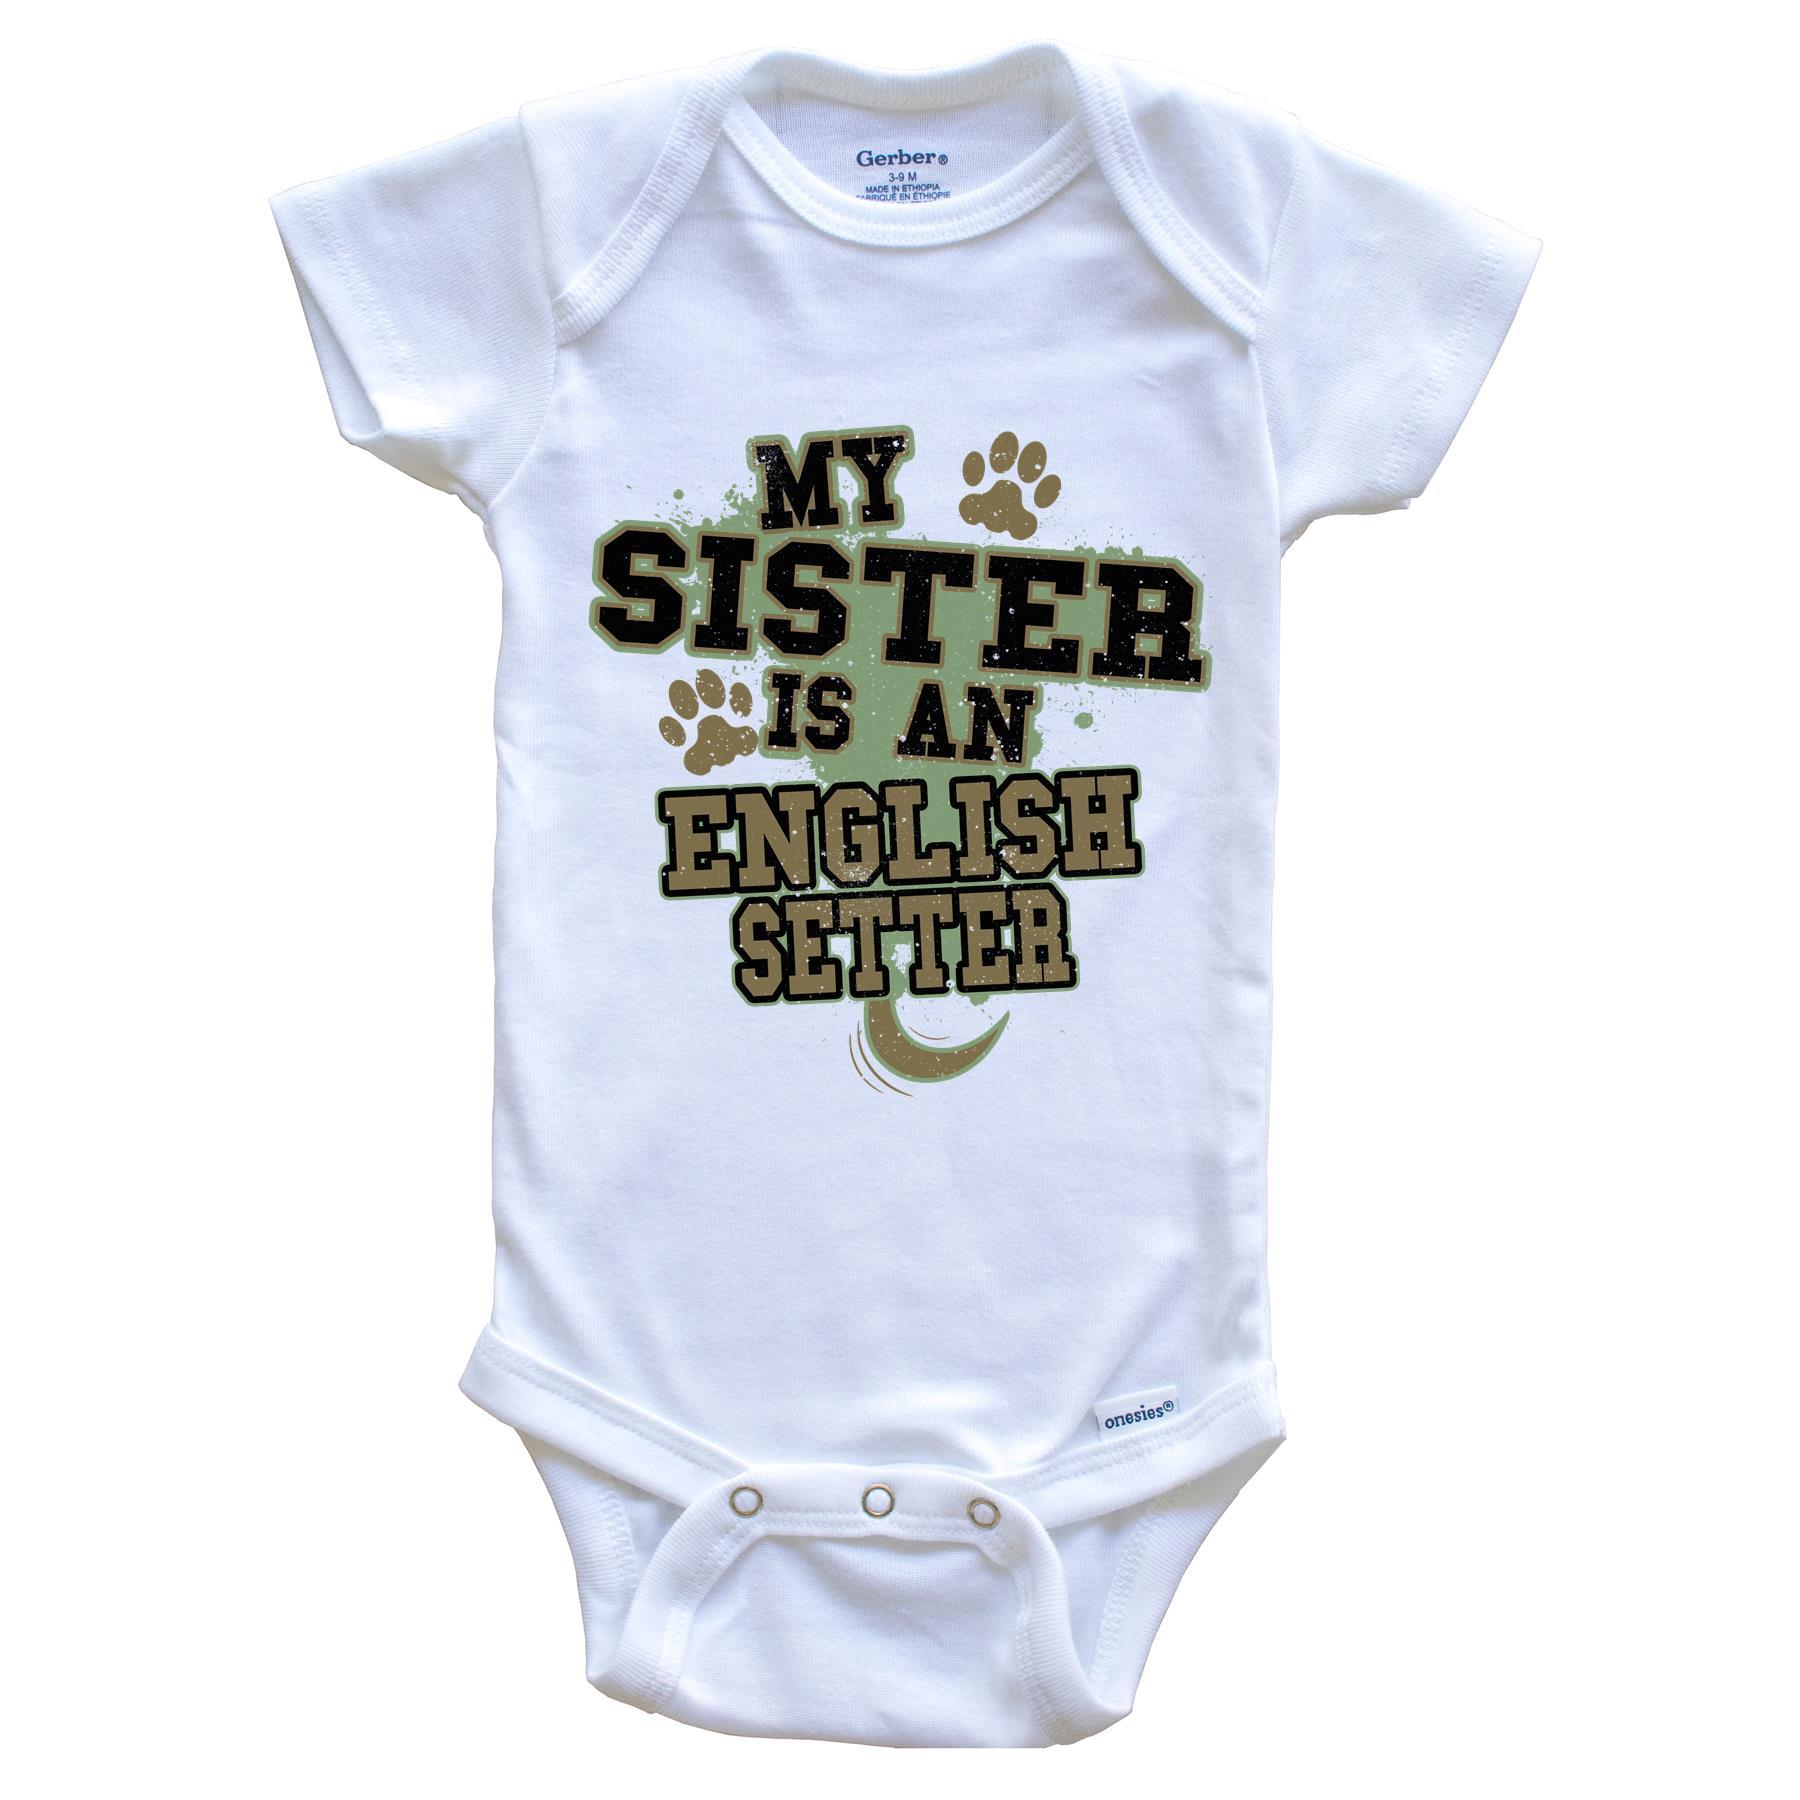 My Sister Is An English Setter Funny Dog Baby Onesie